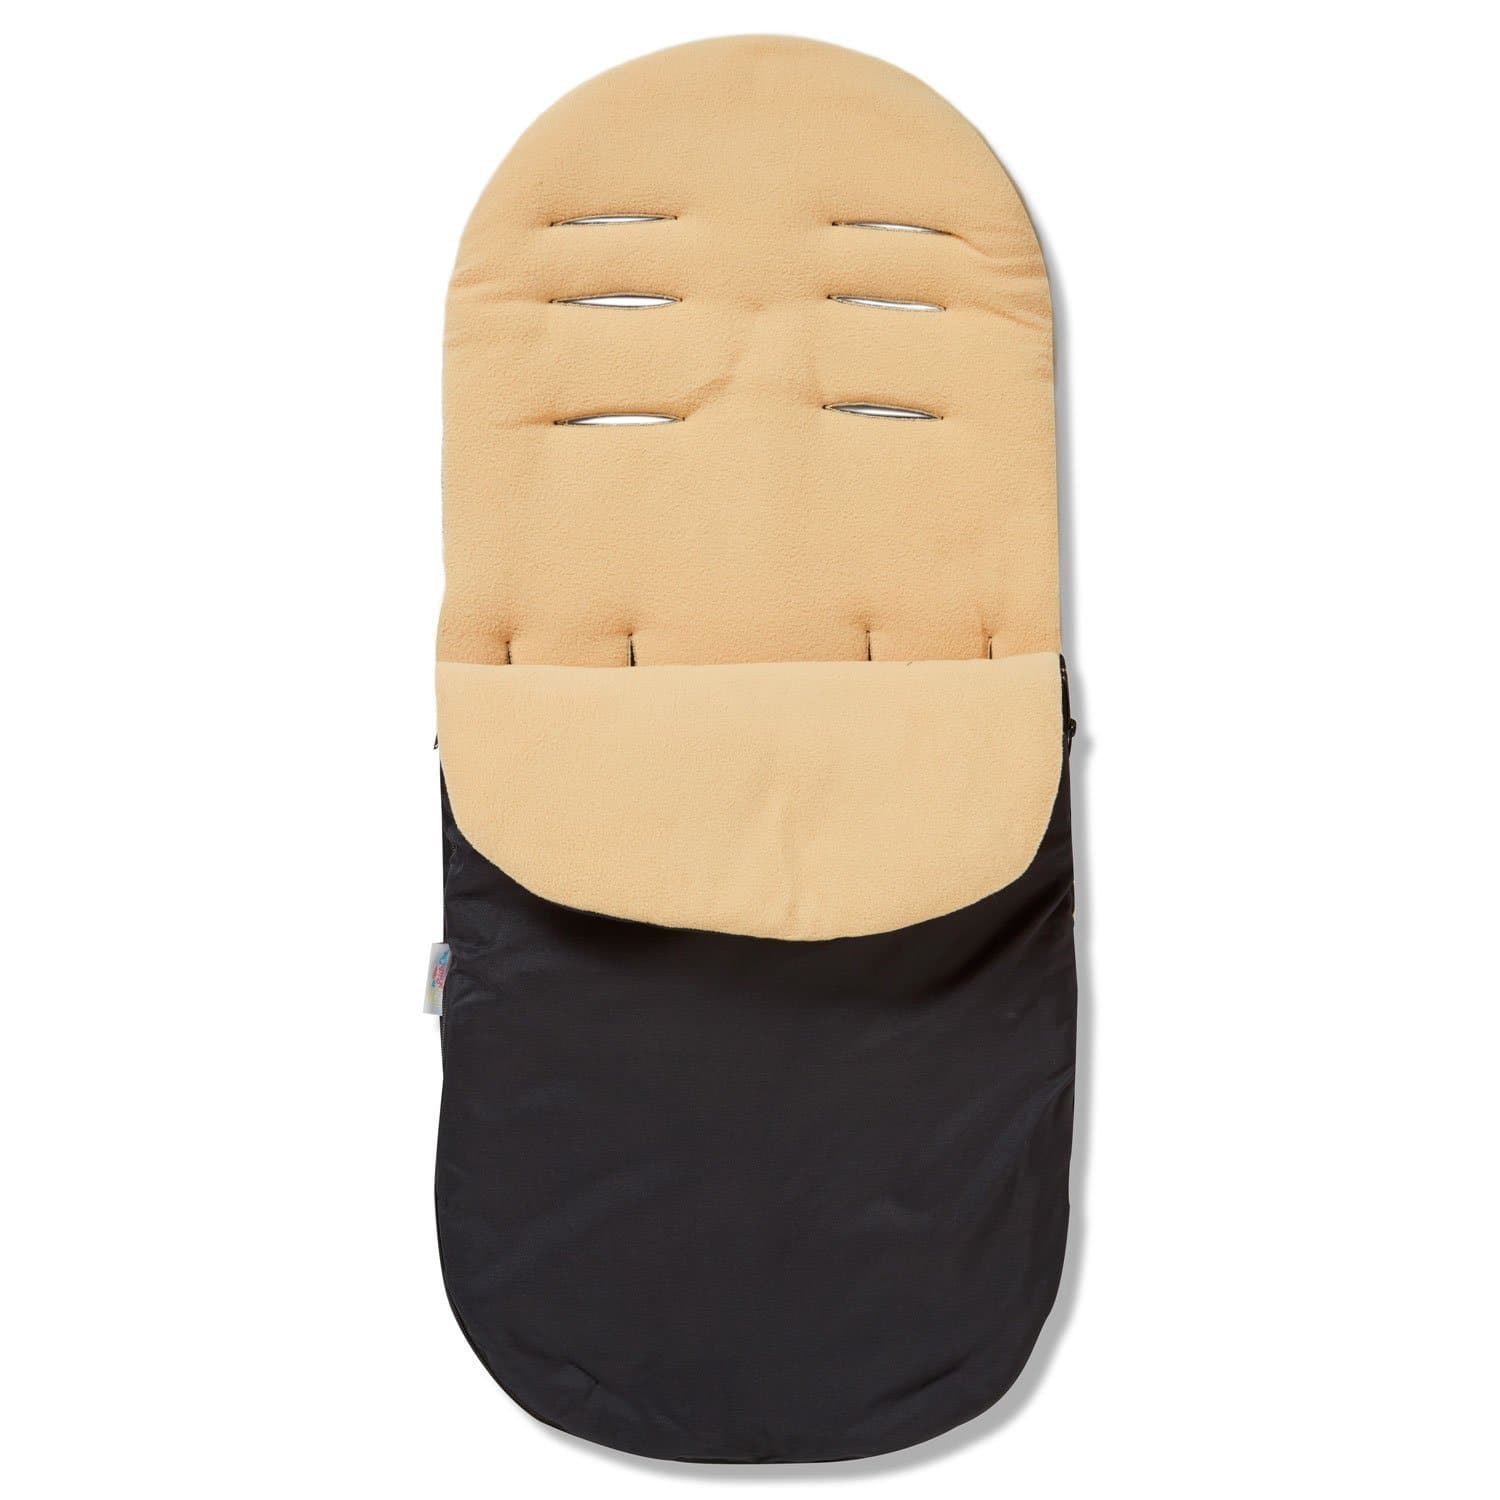 Footmuff / Cosy Toes Compatible with BabiesRus - For Your Little One